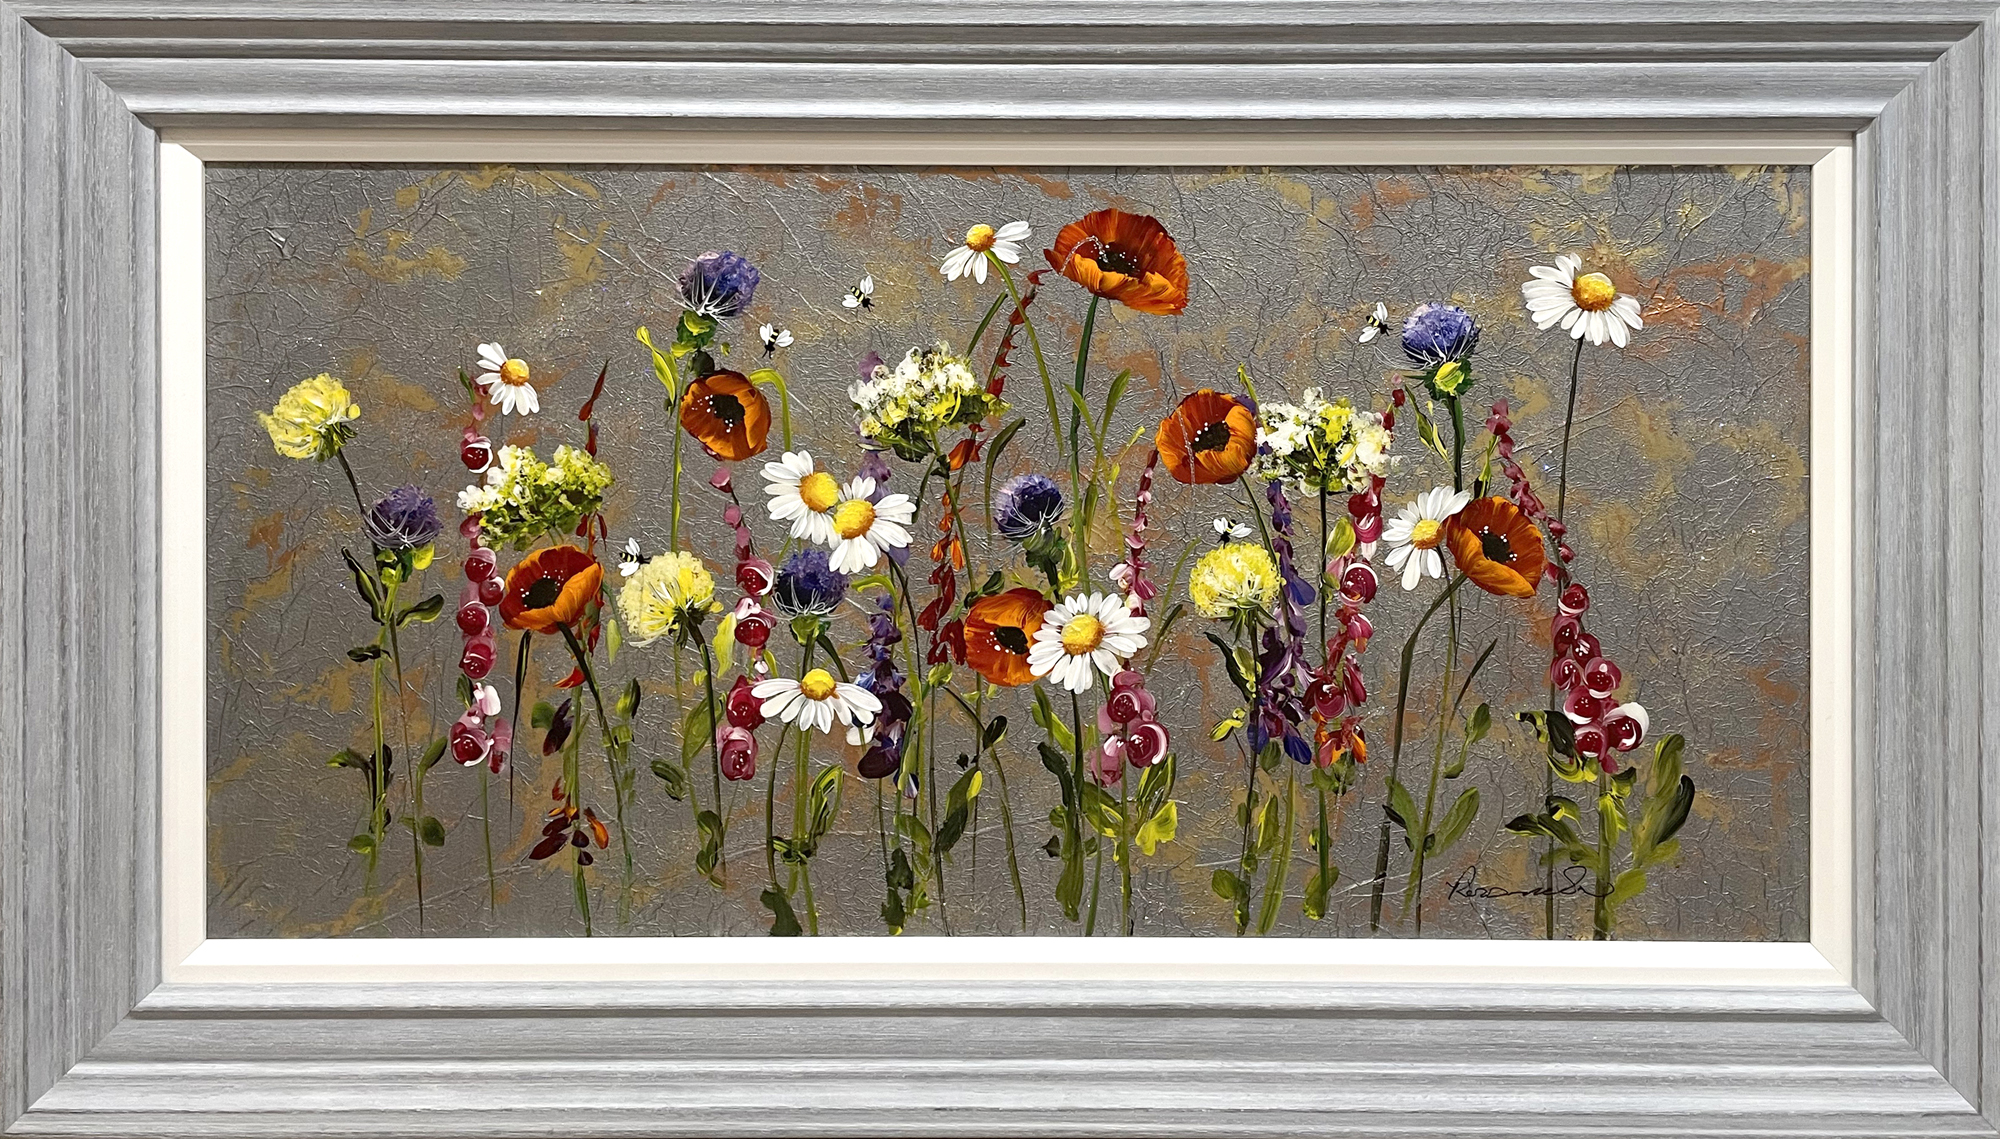 Rozanne Bell, Original Mixed Media Painting, Waltz of the Flowers